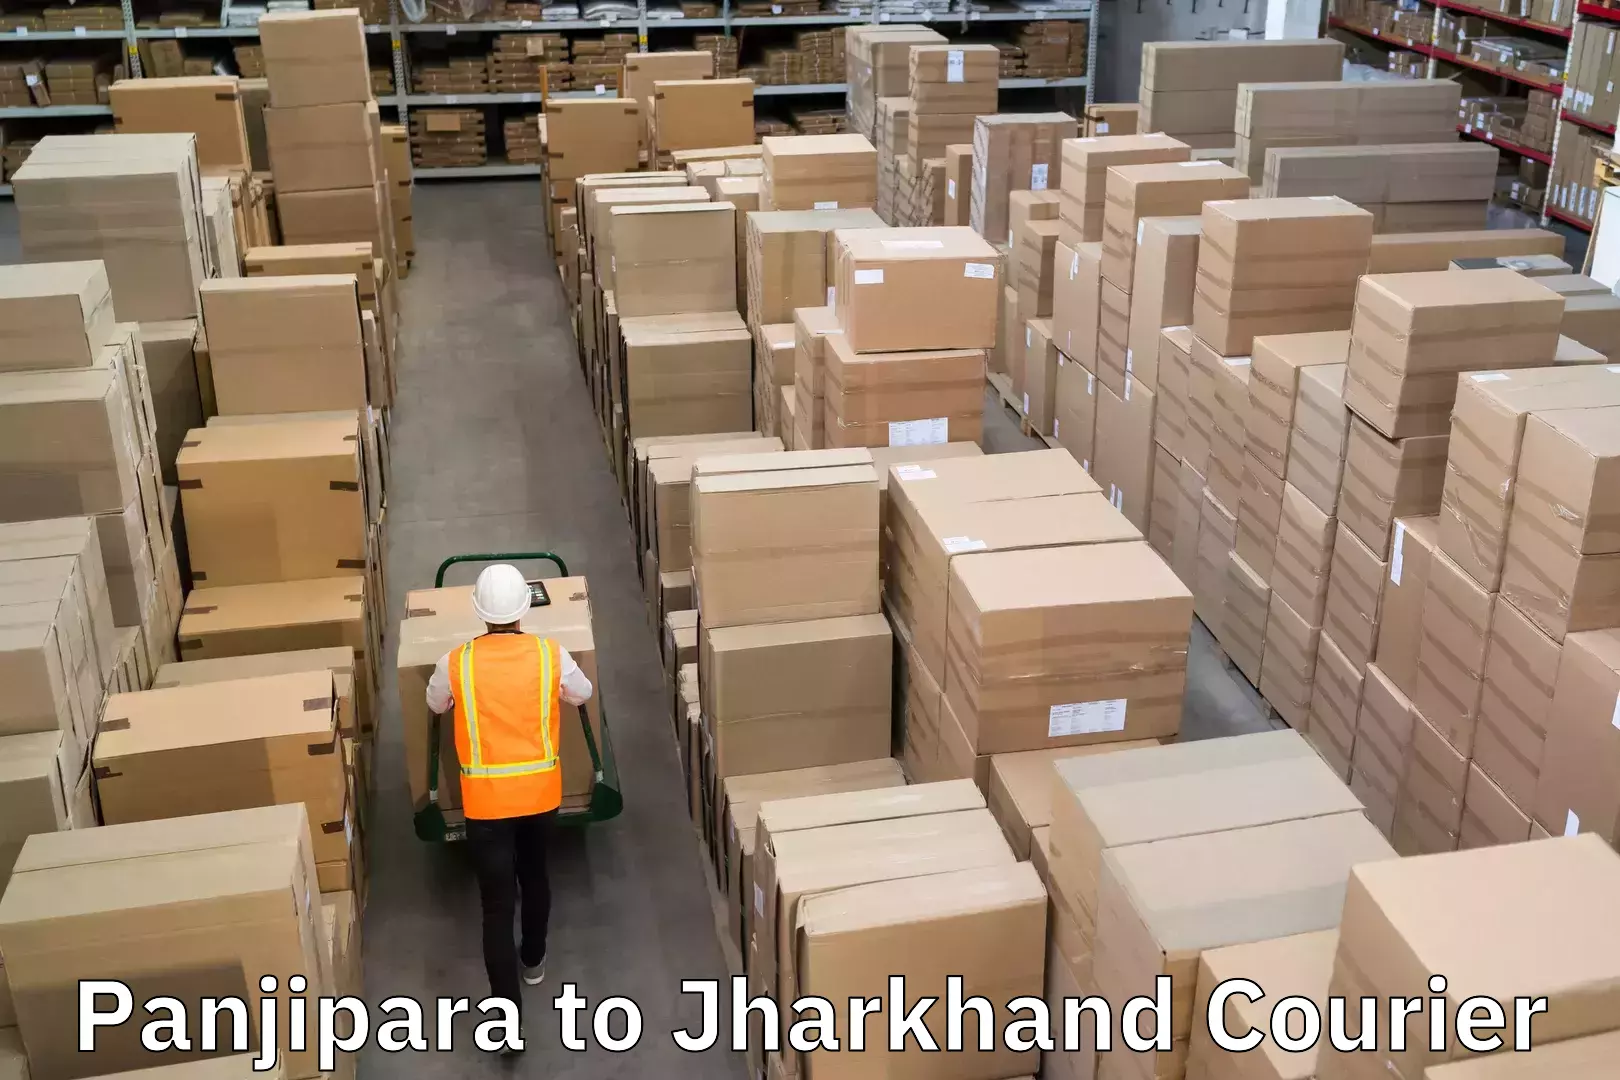 Cargo delivery service Panjipara to Jharkhand